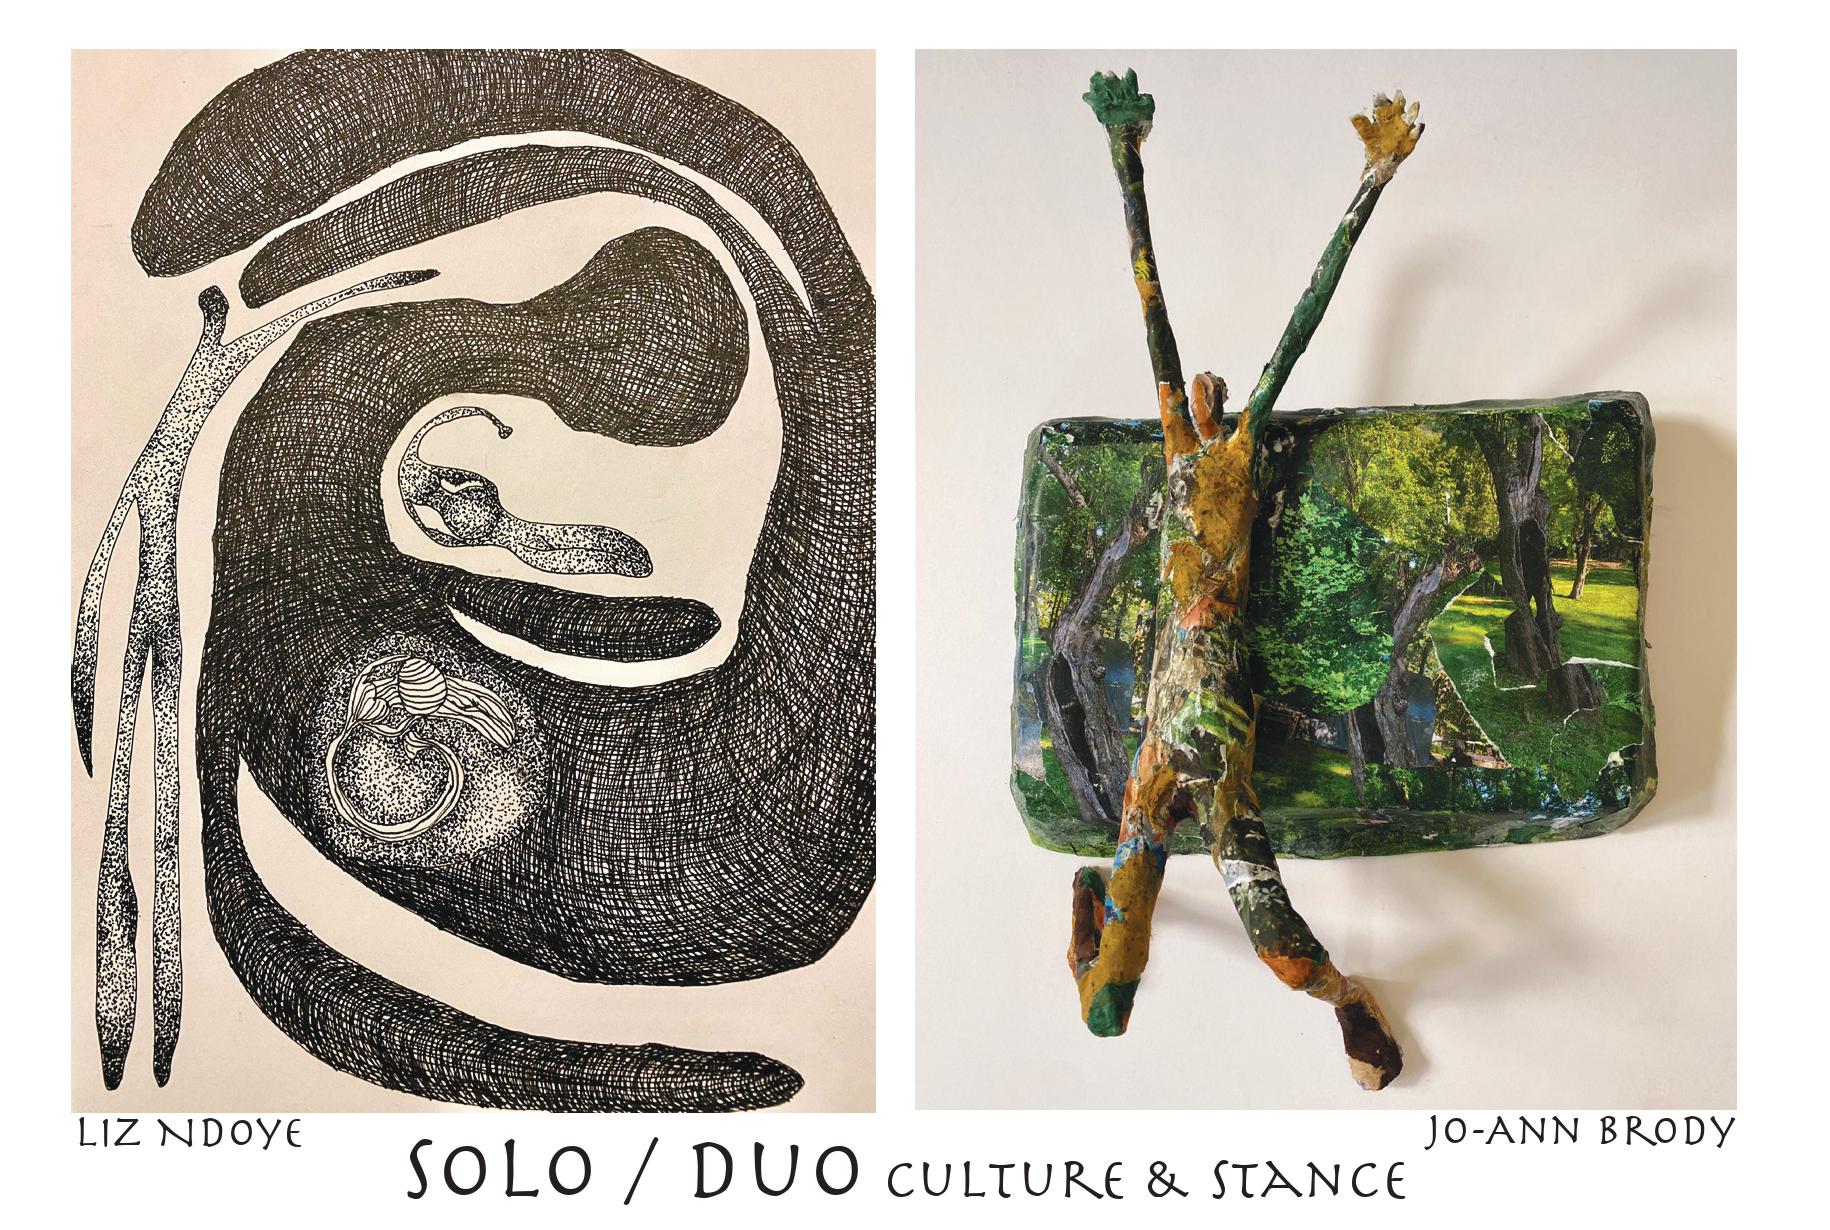 SOLO/DUO CULTURE & STANCE